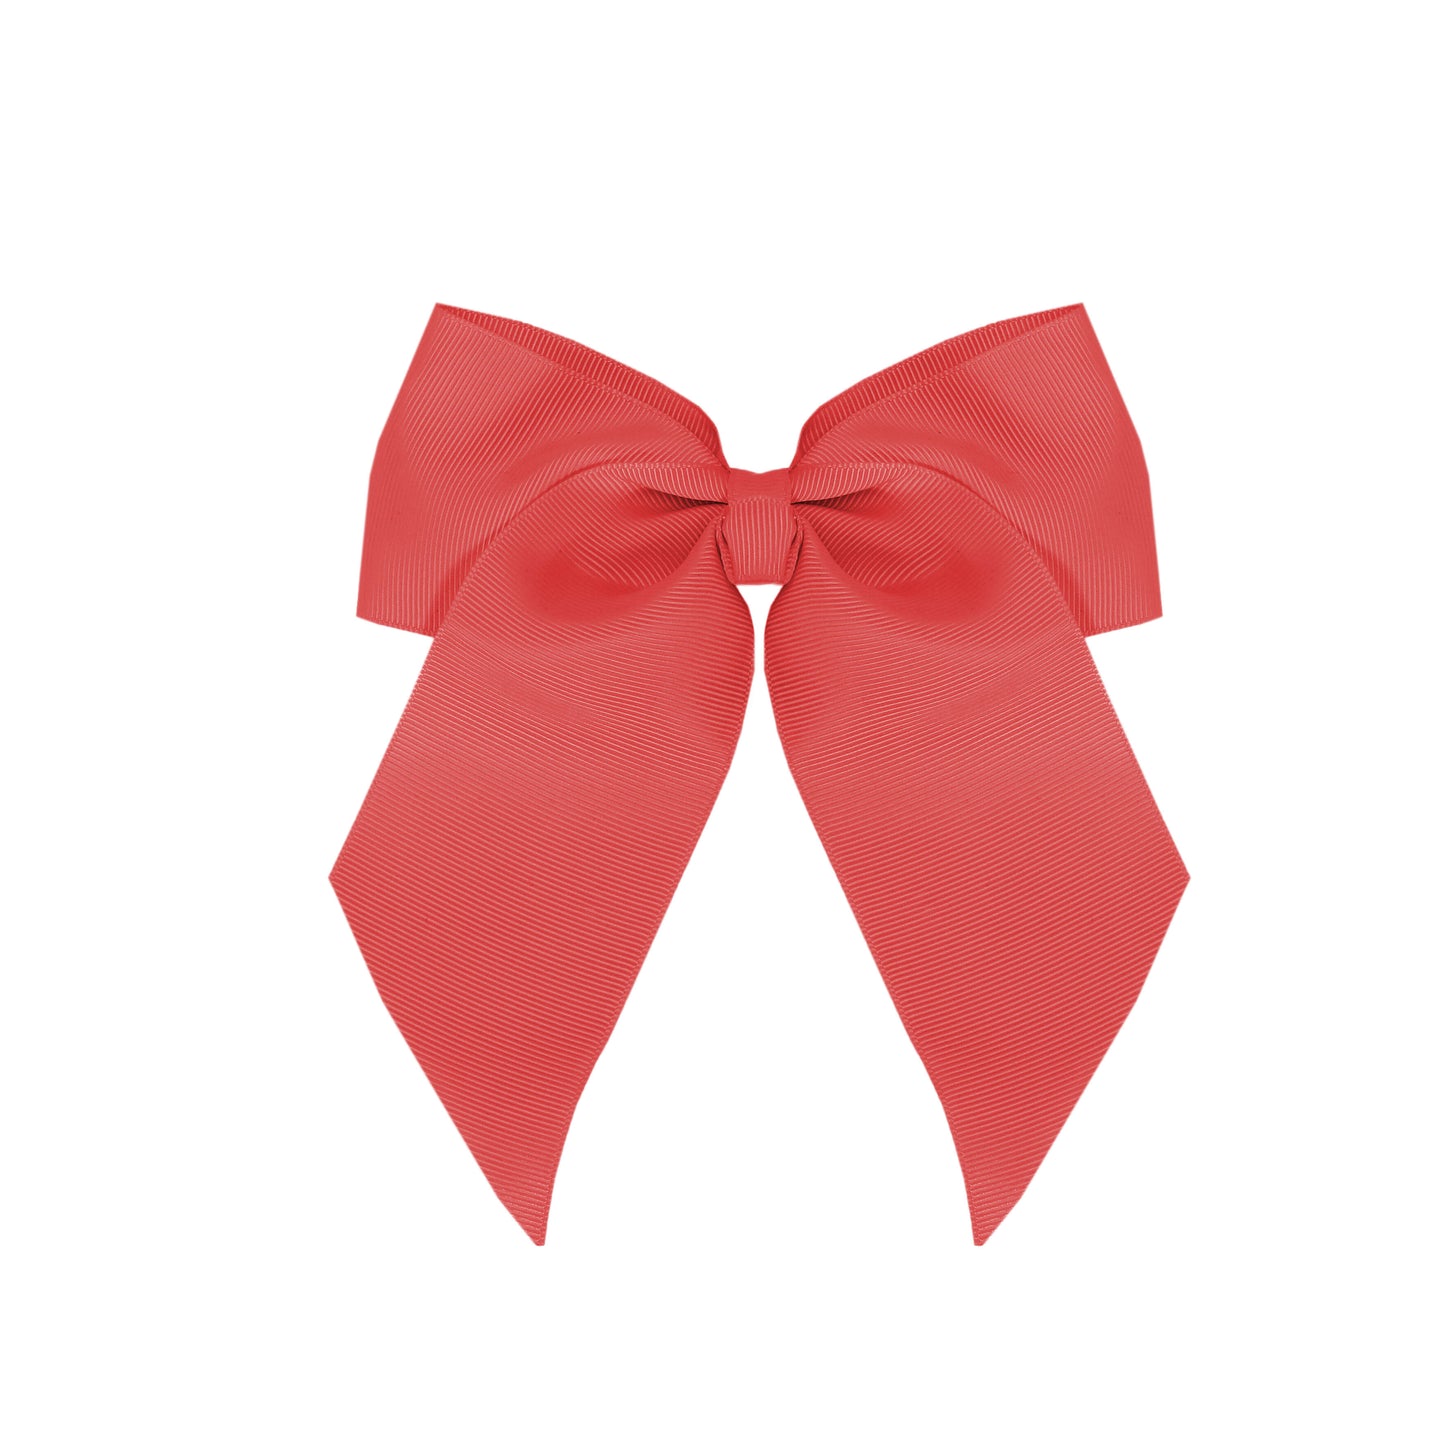 Pastry Slant Tail Bow in Coral